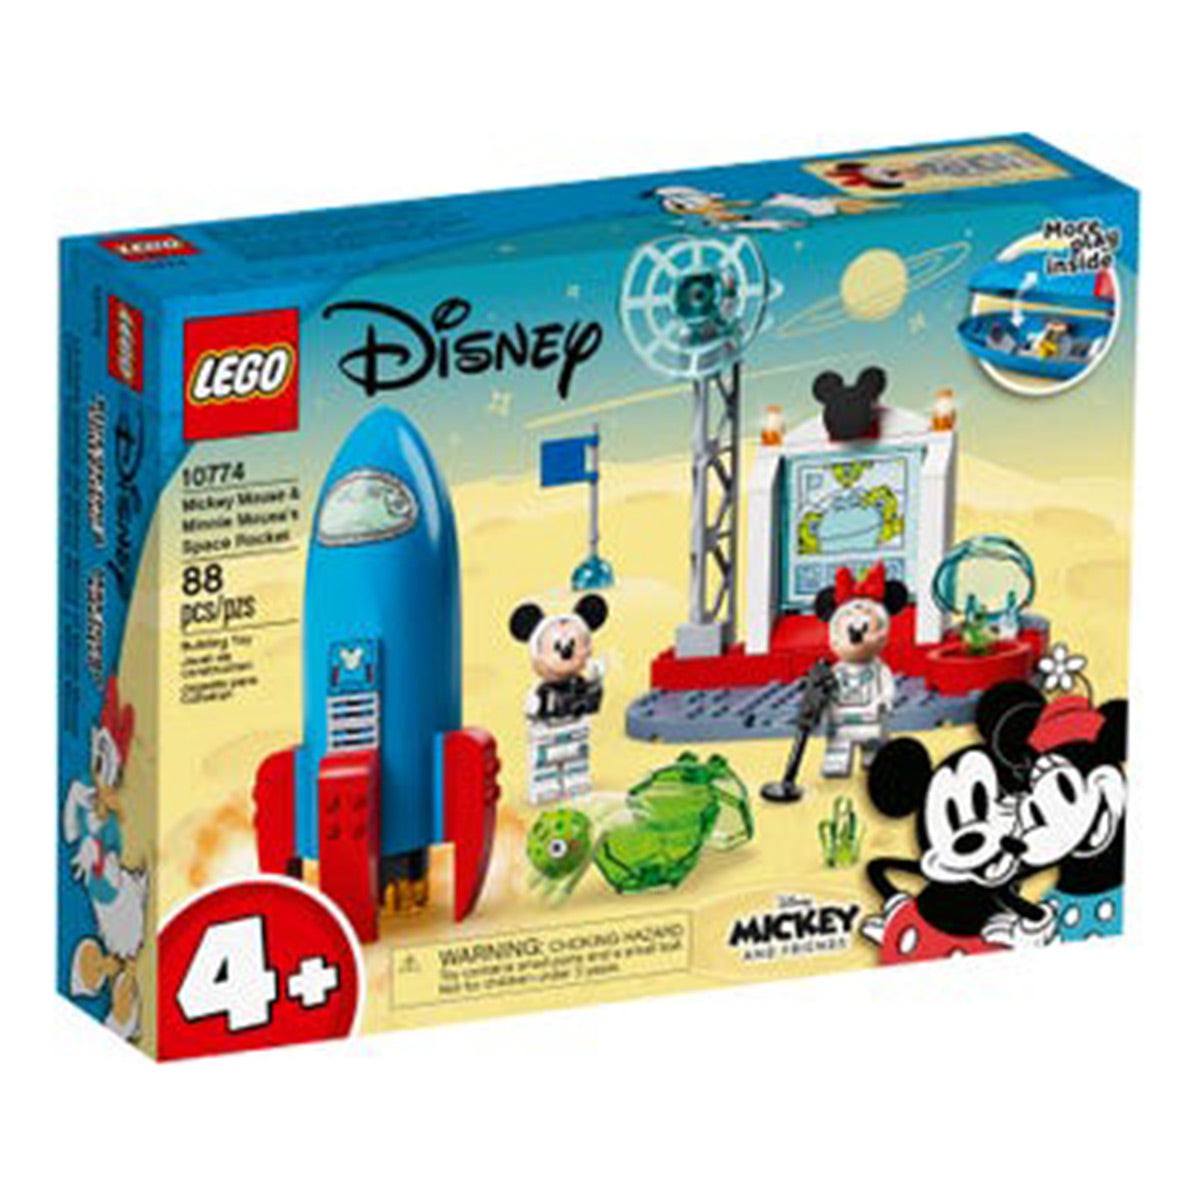 LEGO JOUET K.I.D. INC Toys & Games LEGO Disney Mickey Mouse & Minnie Mouse's Space Rocket, 10774, Ages 4+, 88 Pieces 673419339797